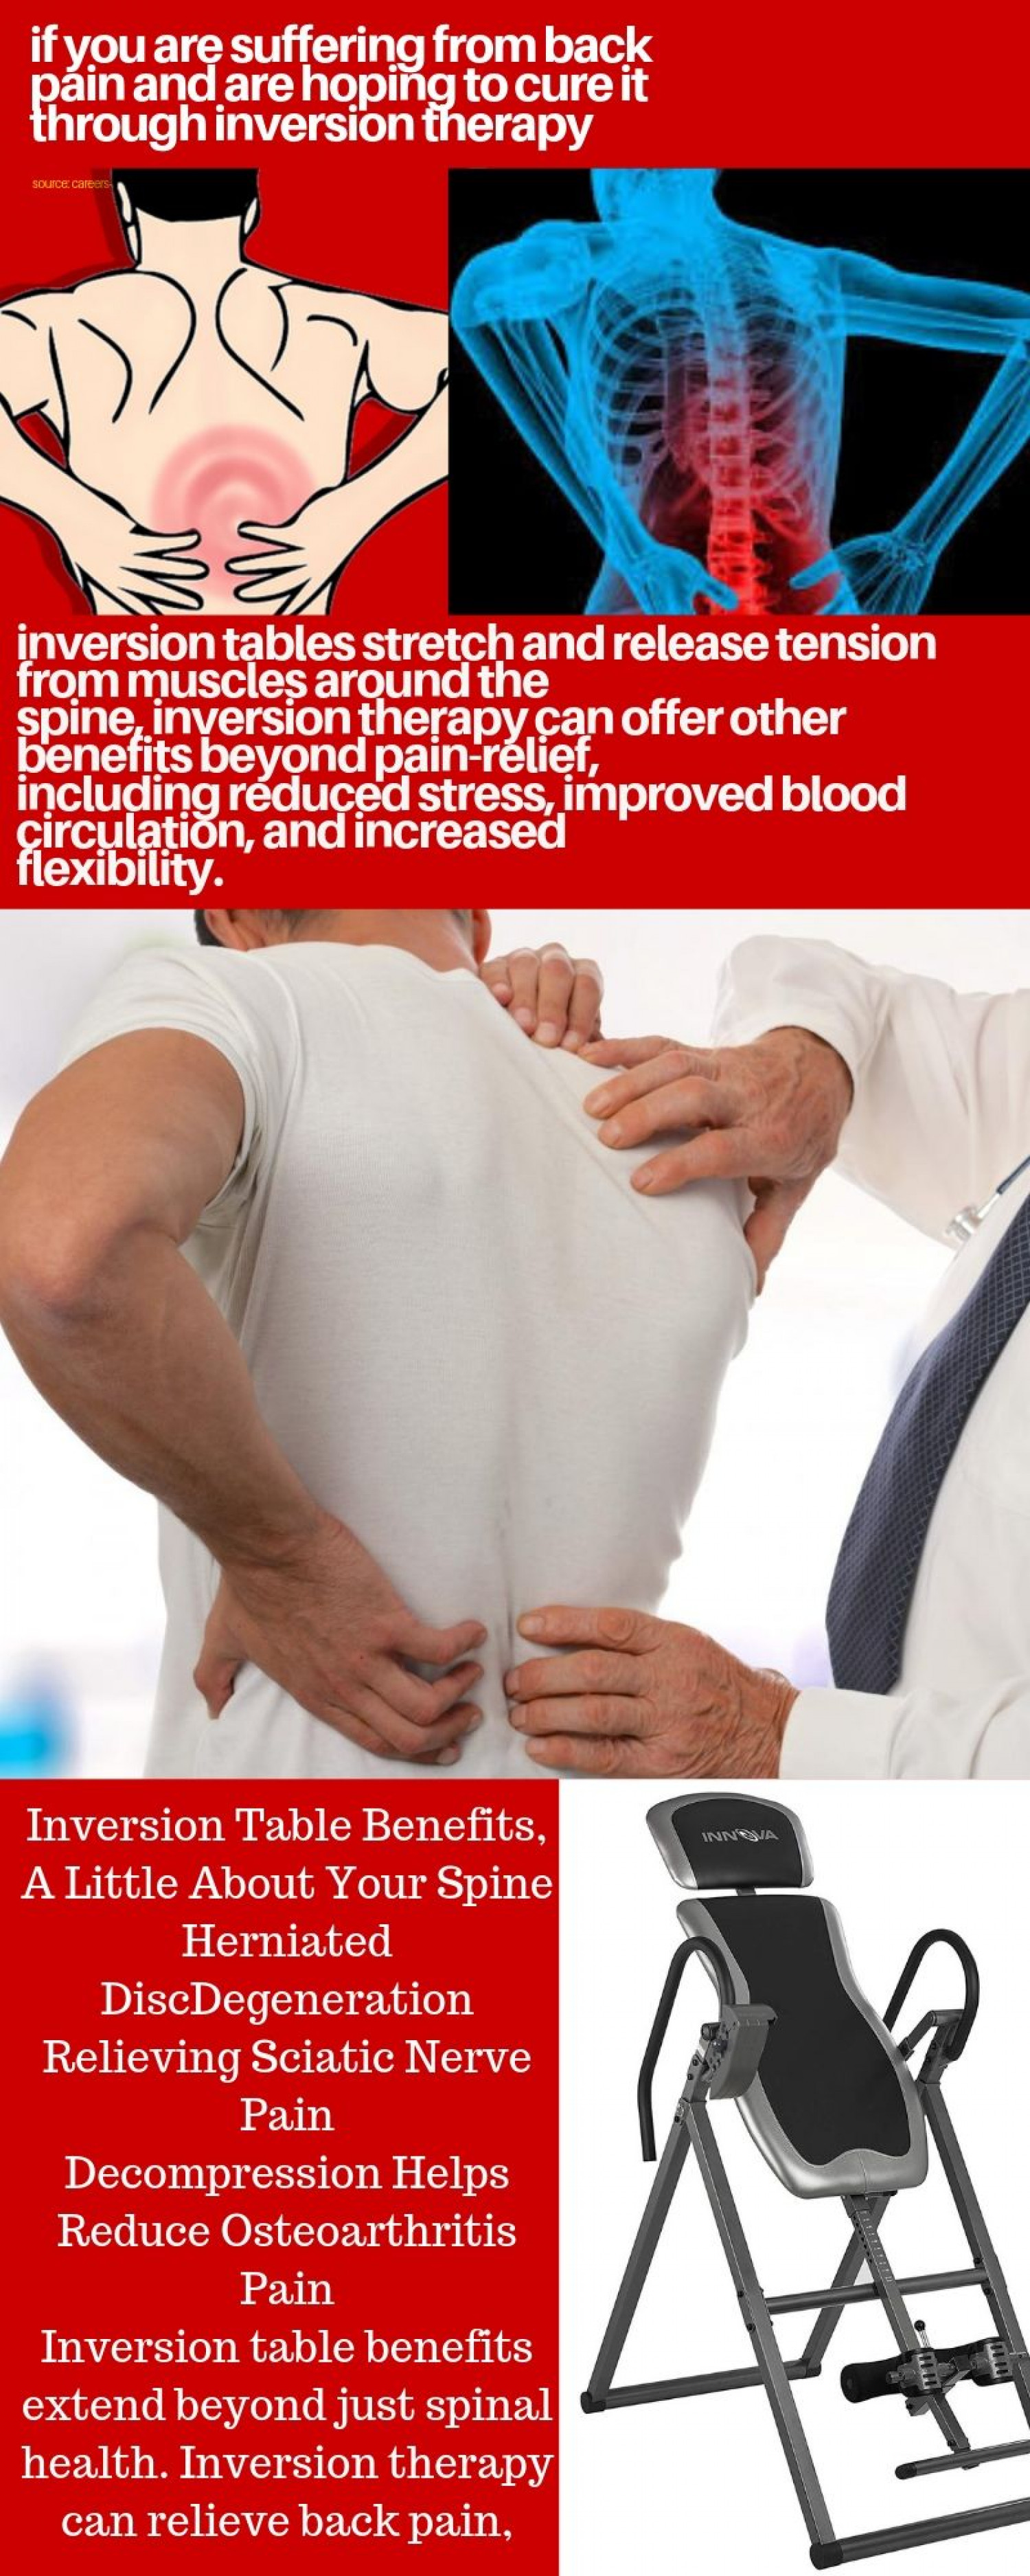 Infographic: back pain management guidelines Infographic